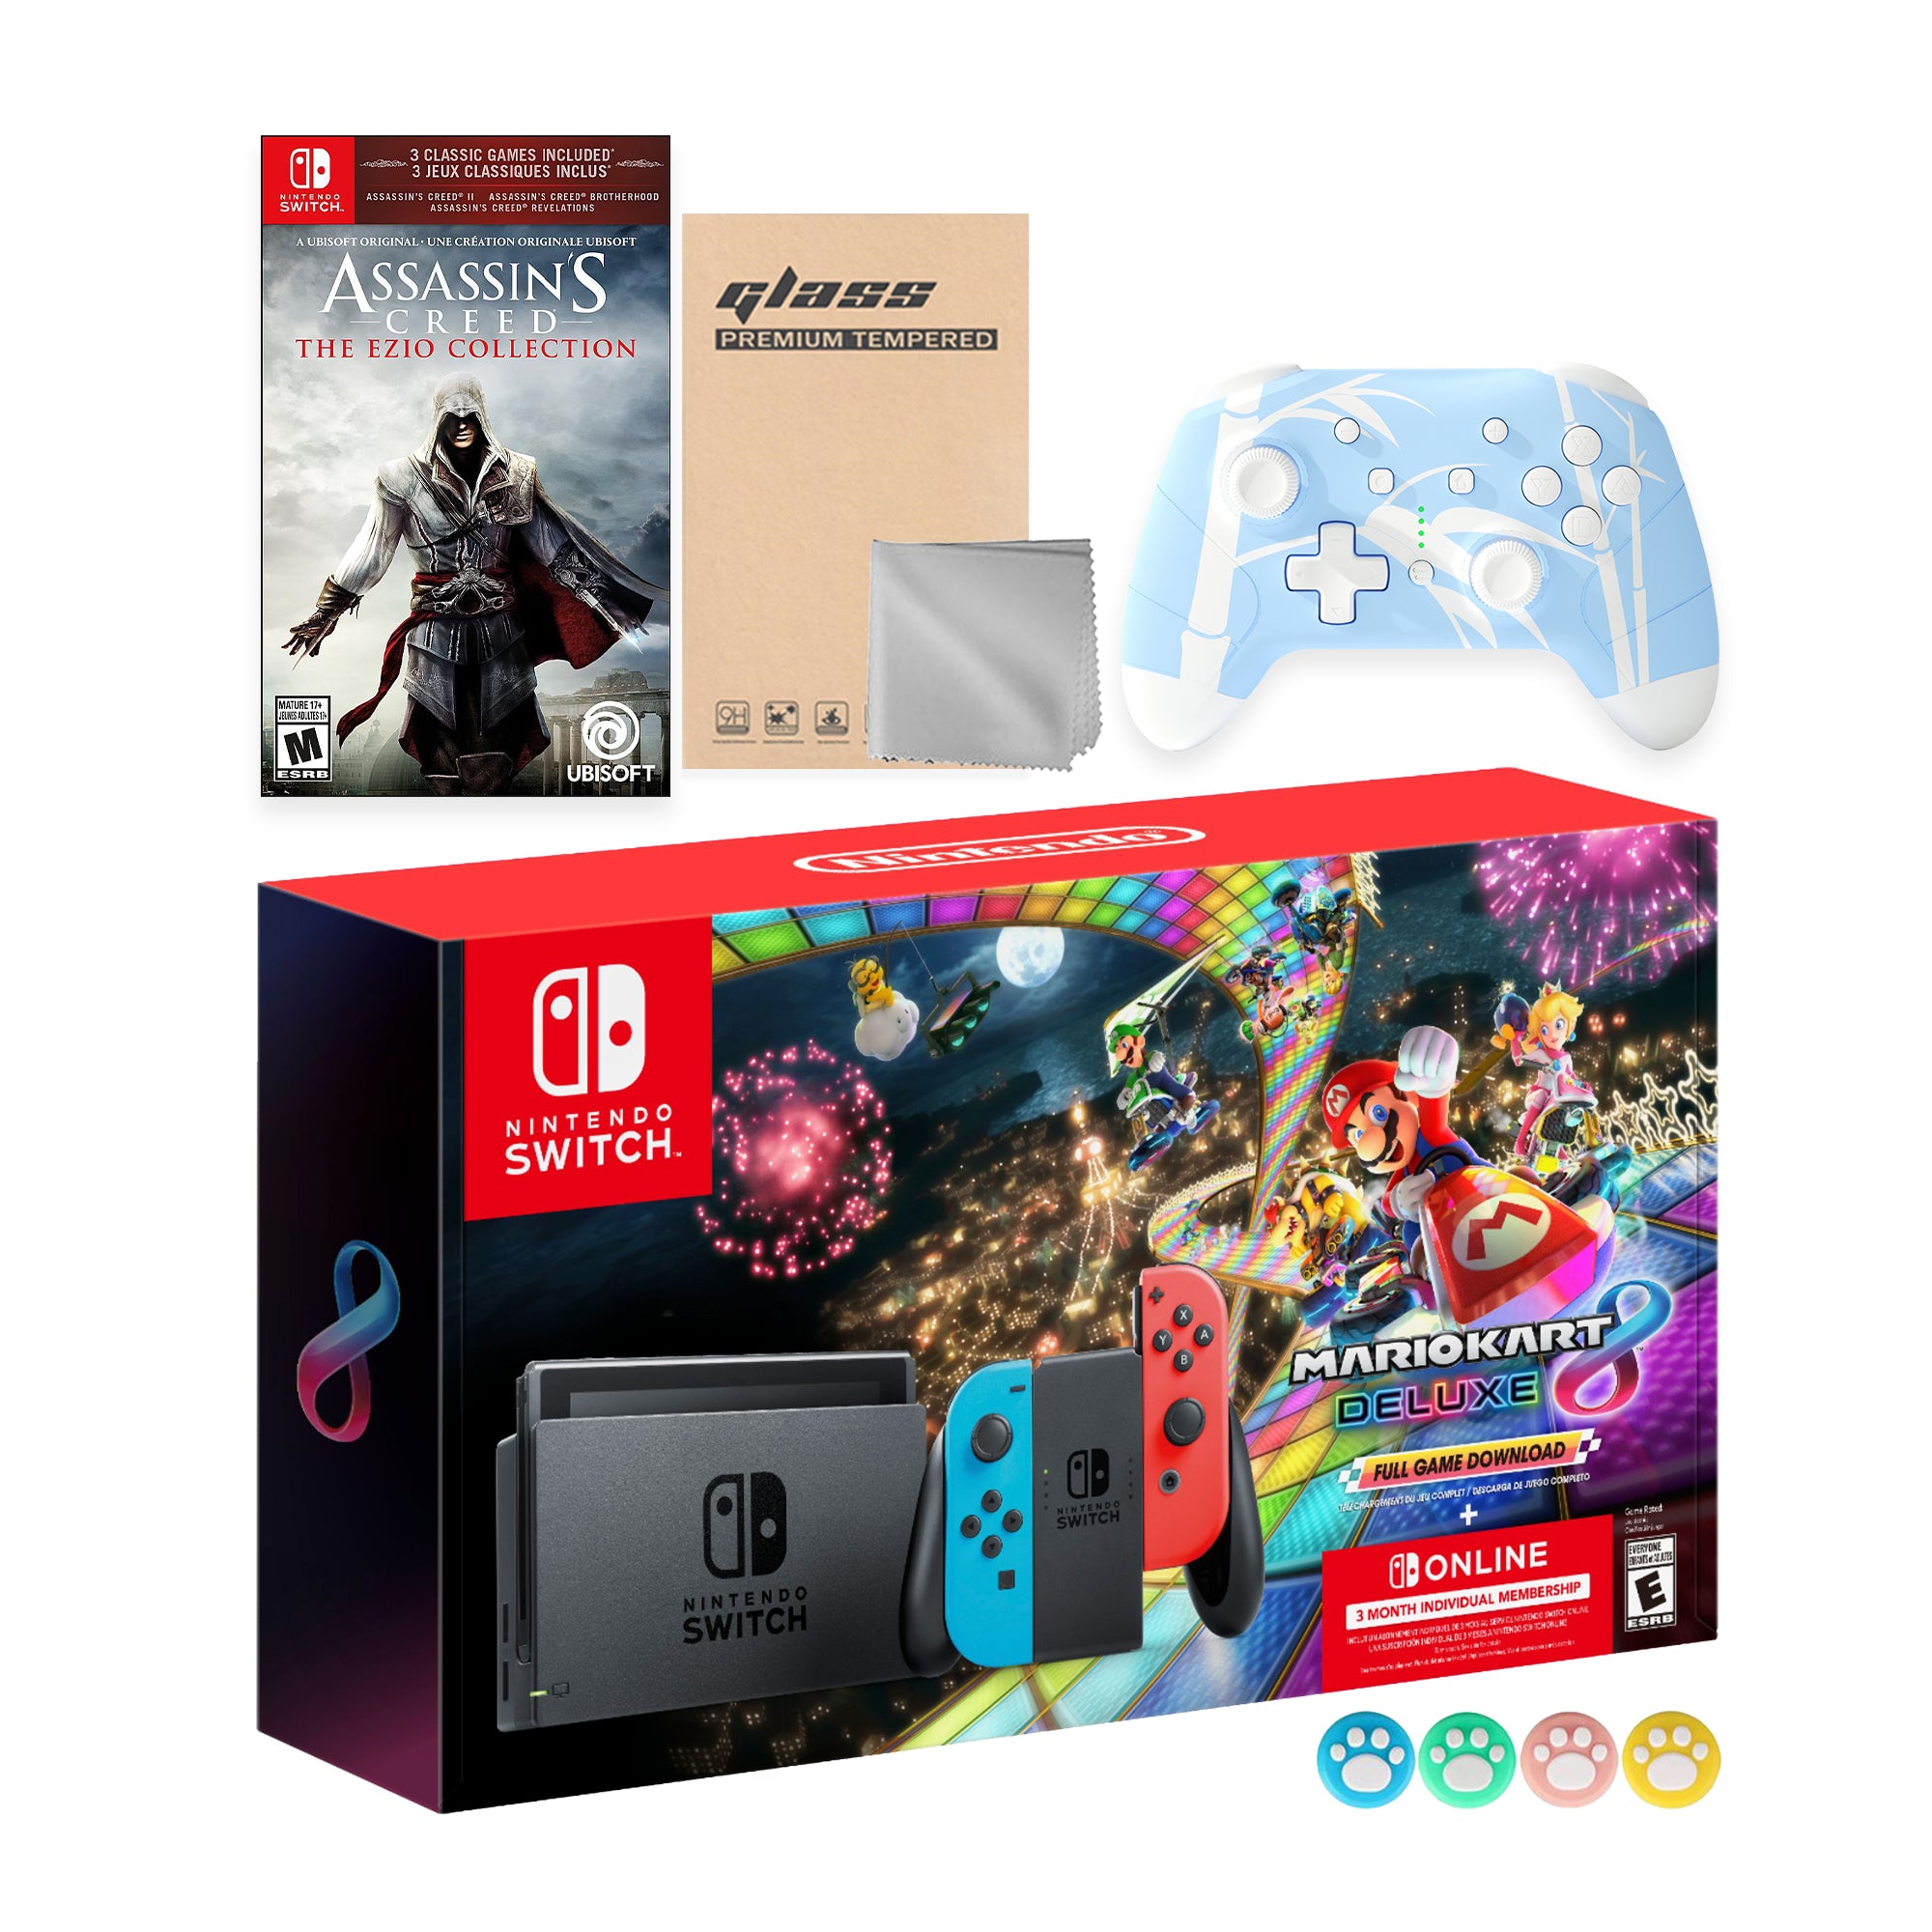 Nintendo Switch Mario Kart 8 Deluxe Bundle: Red Blue Console, Mario Kart 8 & Membership with Assassin's Creed Ezio Collection with Mytrix Wireless Pro Controller Blue Bamboo and Accessories